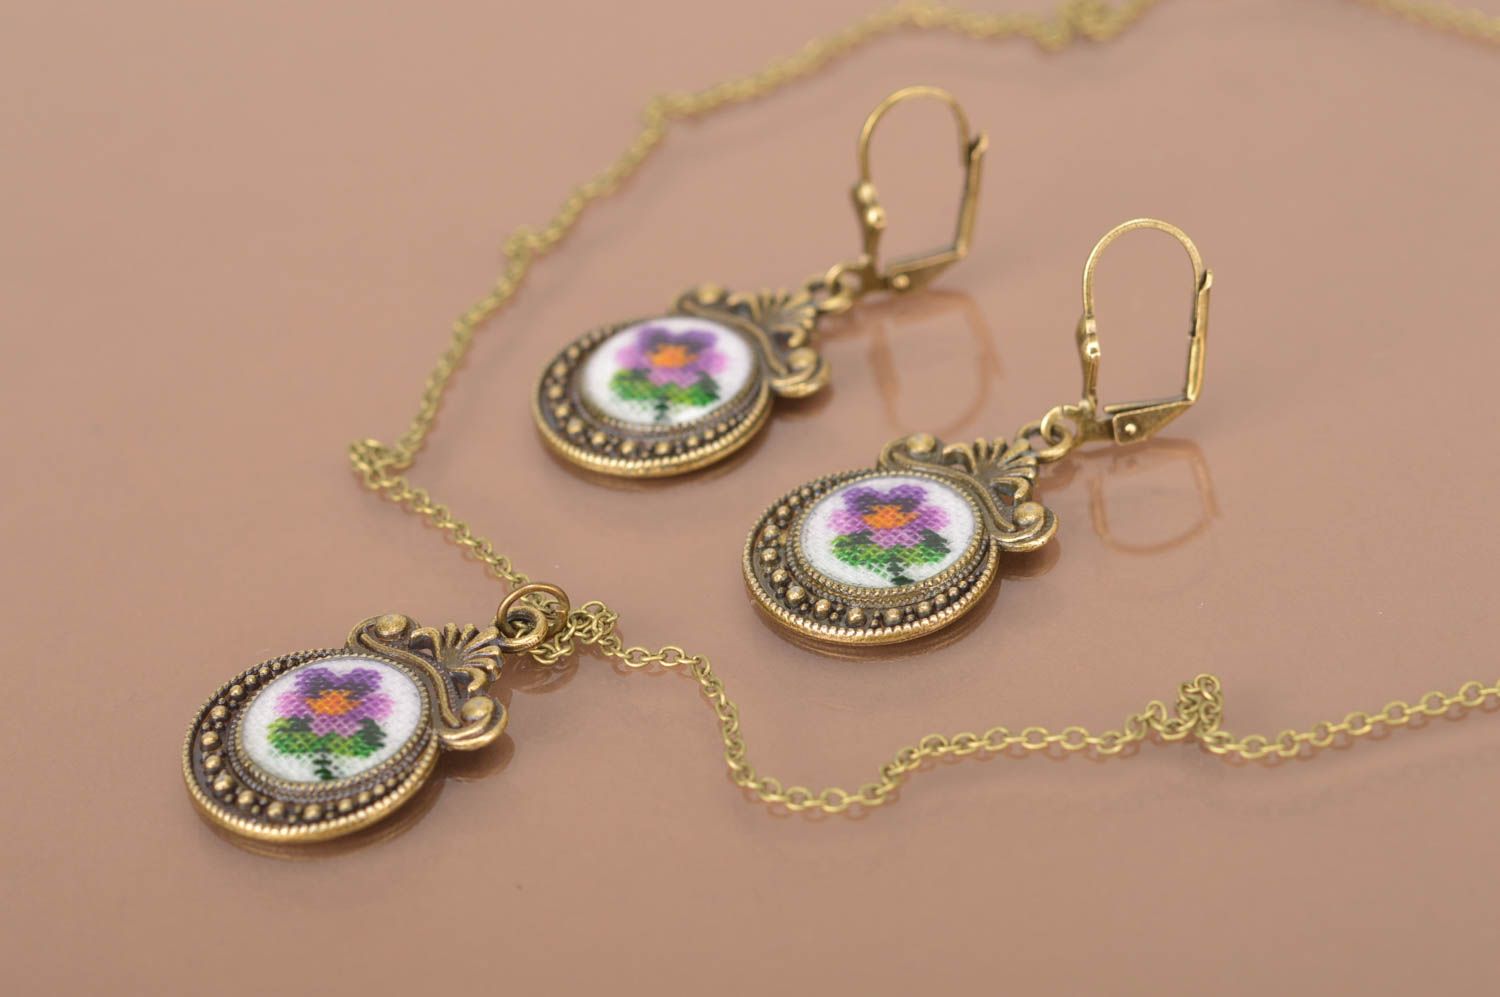 Handcrafted jewelry set stud earrings pendant necklace flower jewelry gift ideas photo 3